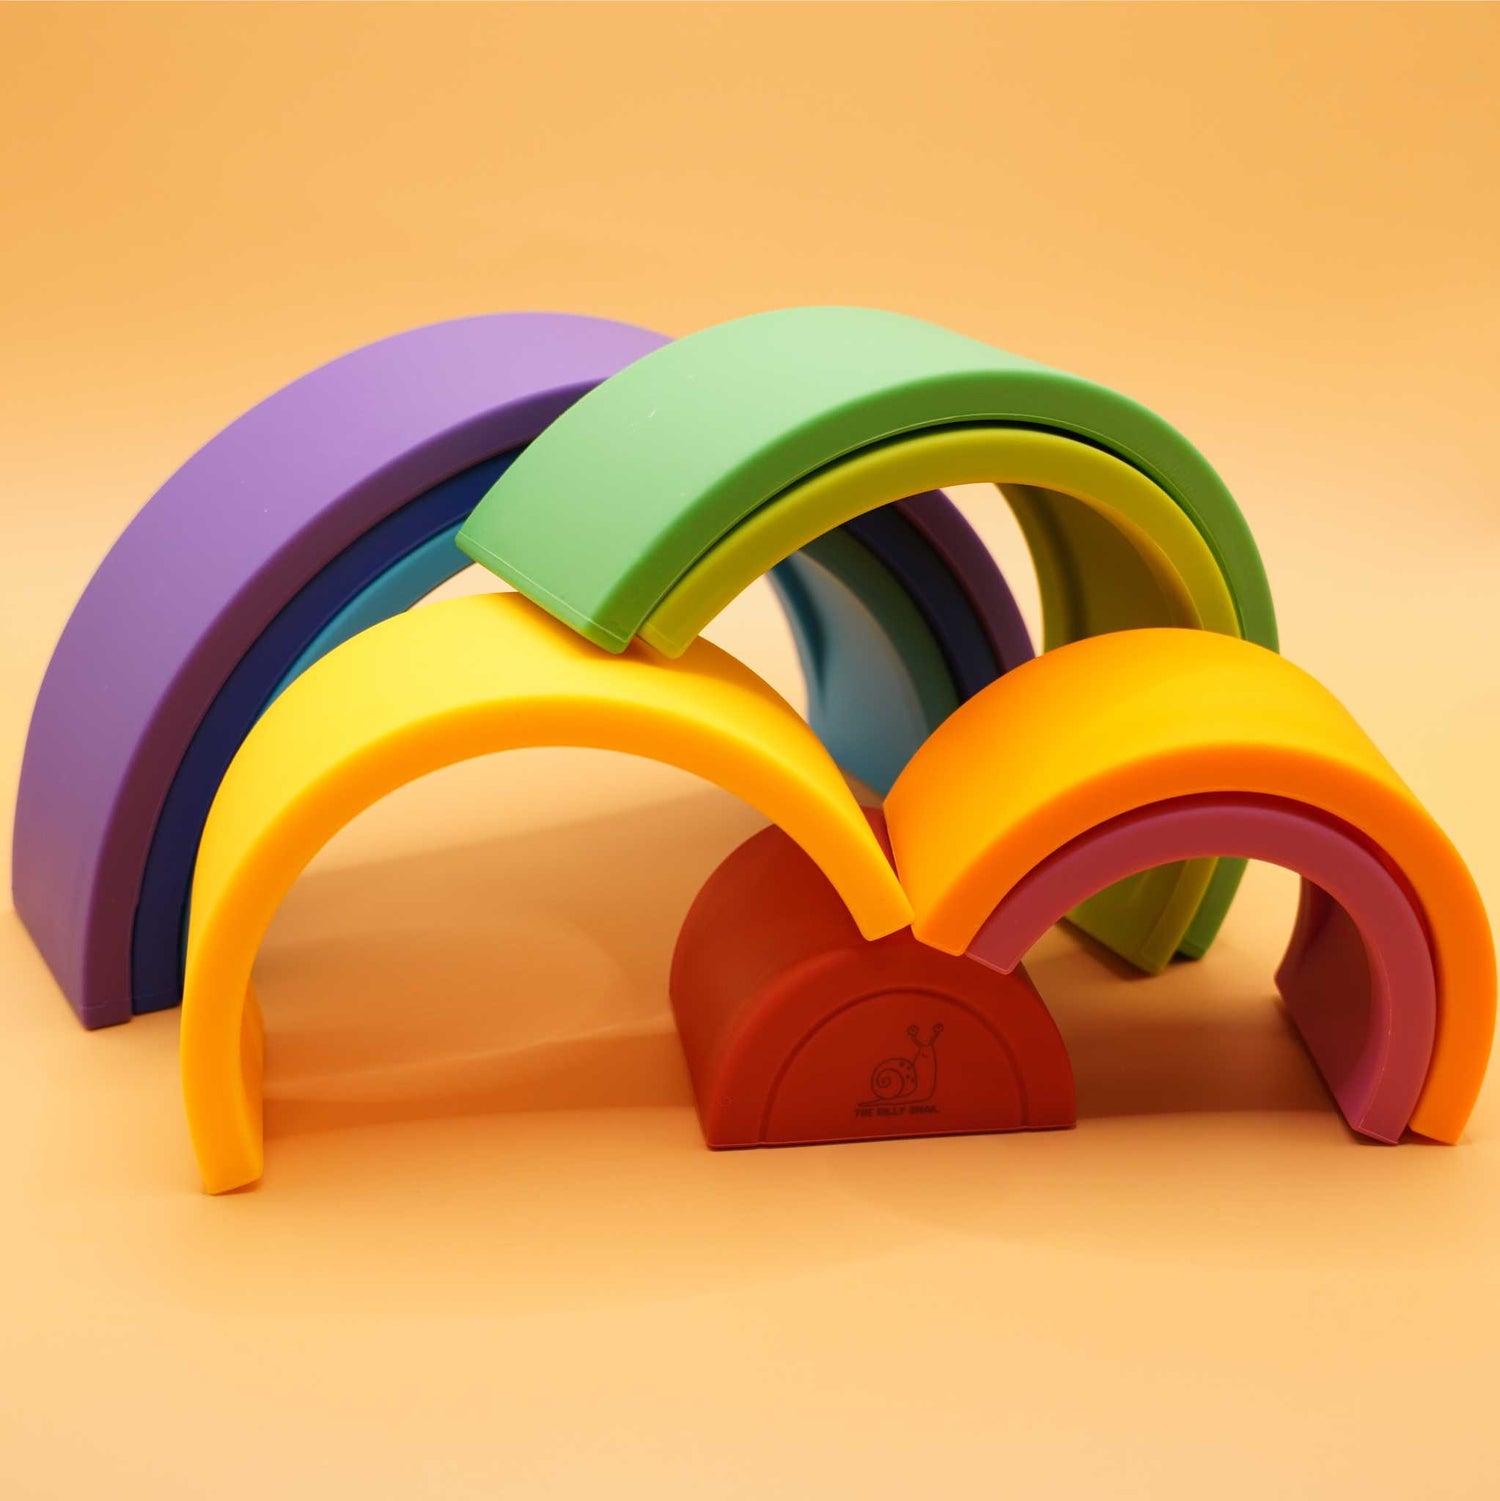 pieces stacked of radiant rainbow silicone stacking toy